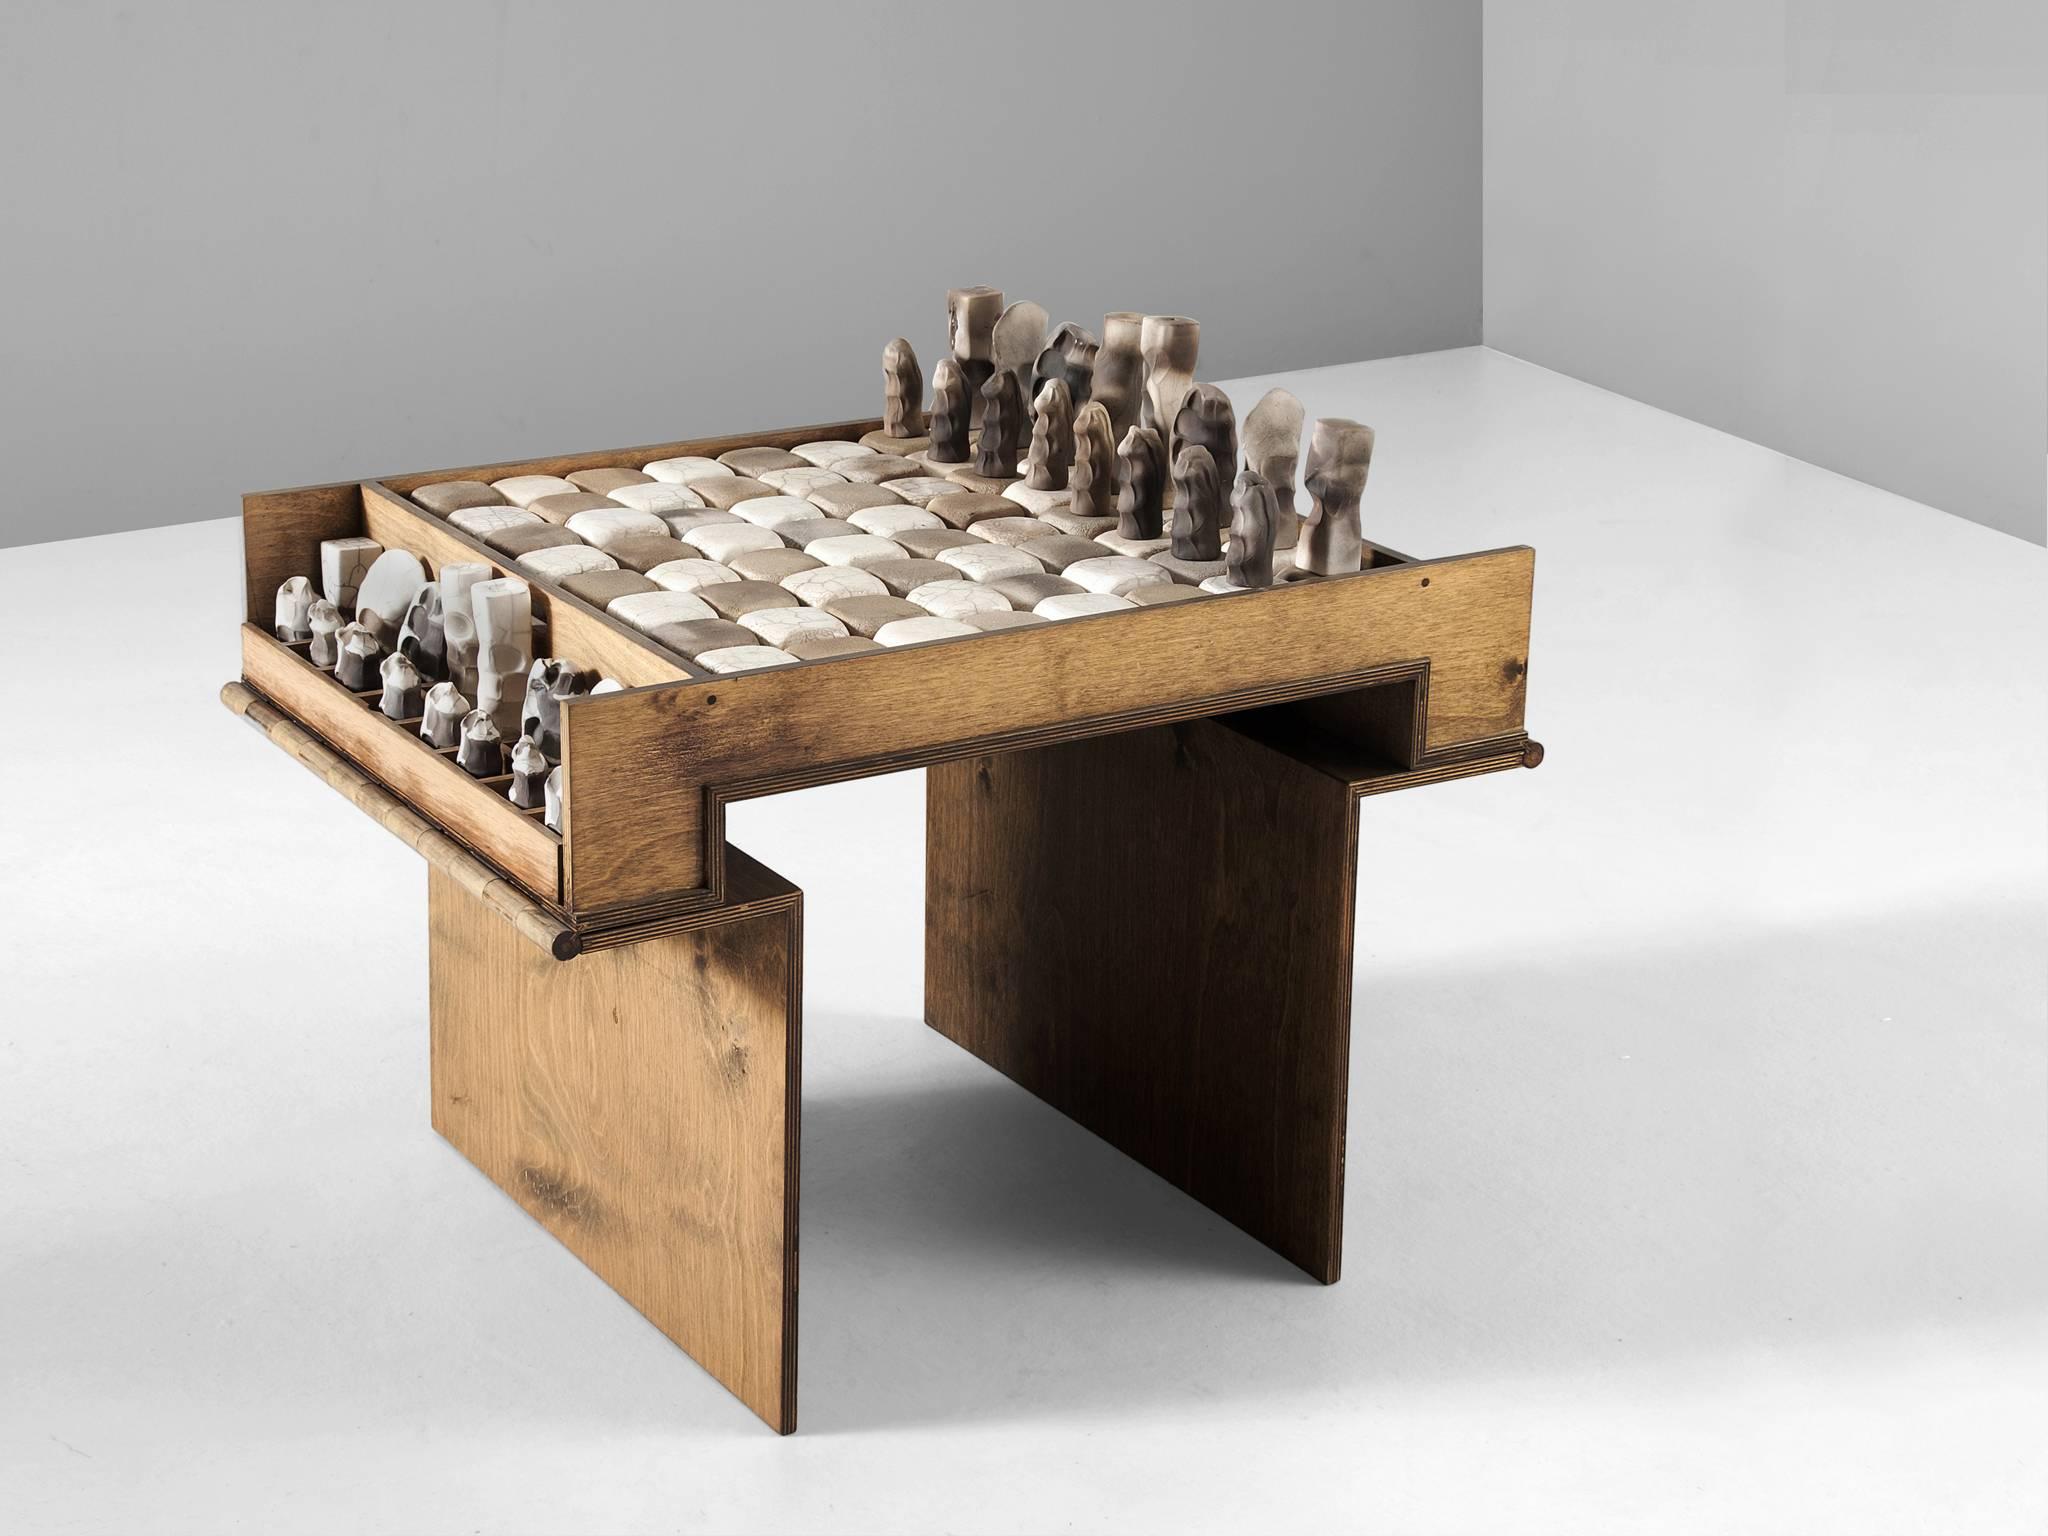 Chess game, in ceramic and wood, Italy, 1950s

Exceptional game of chess. The birch plywood table holds the ceramic chess board and pieces. The wooden table can be fold into a chest. A checkered board of white and black ceramic blocks. All chess